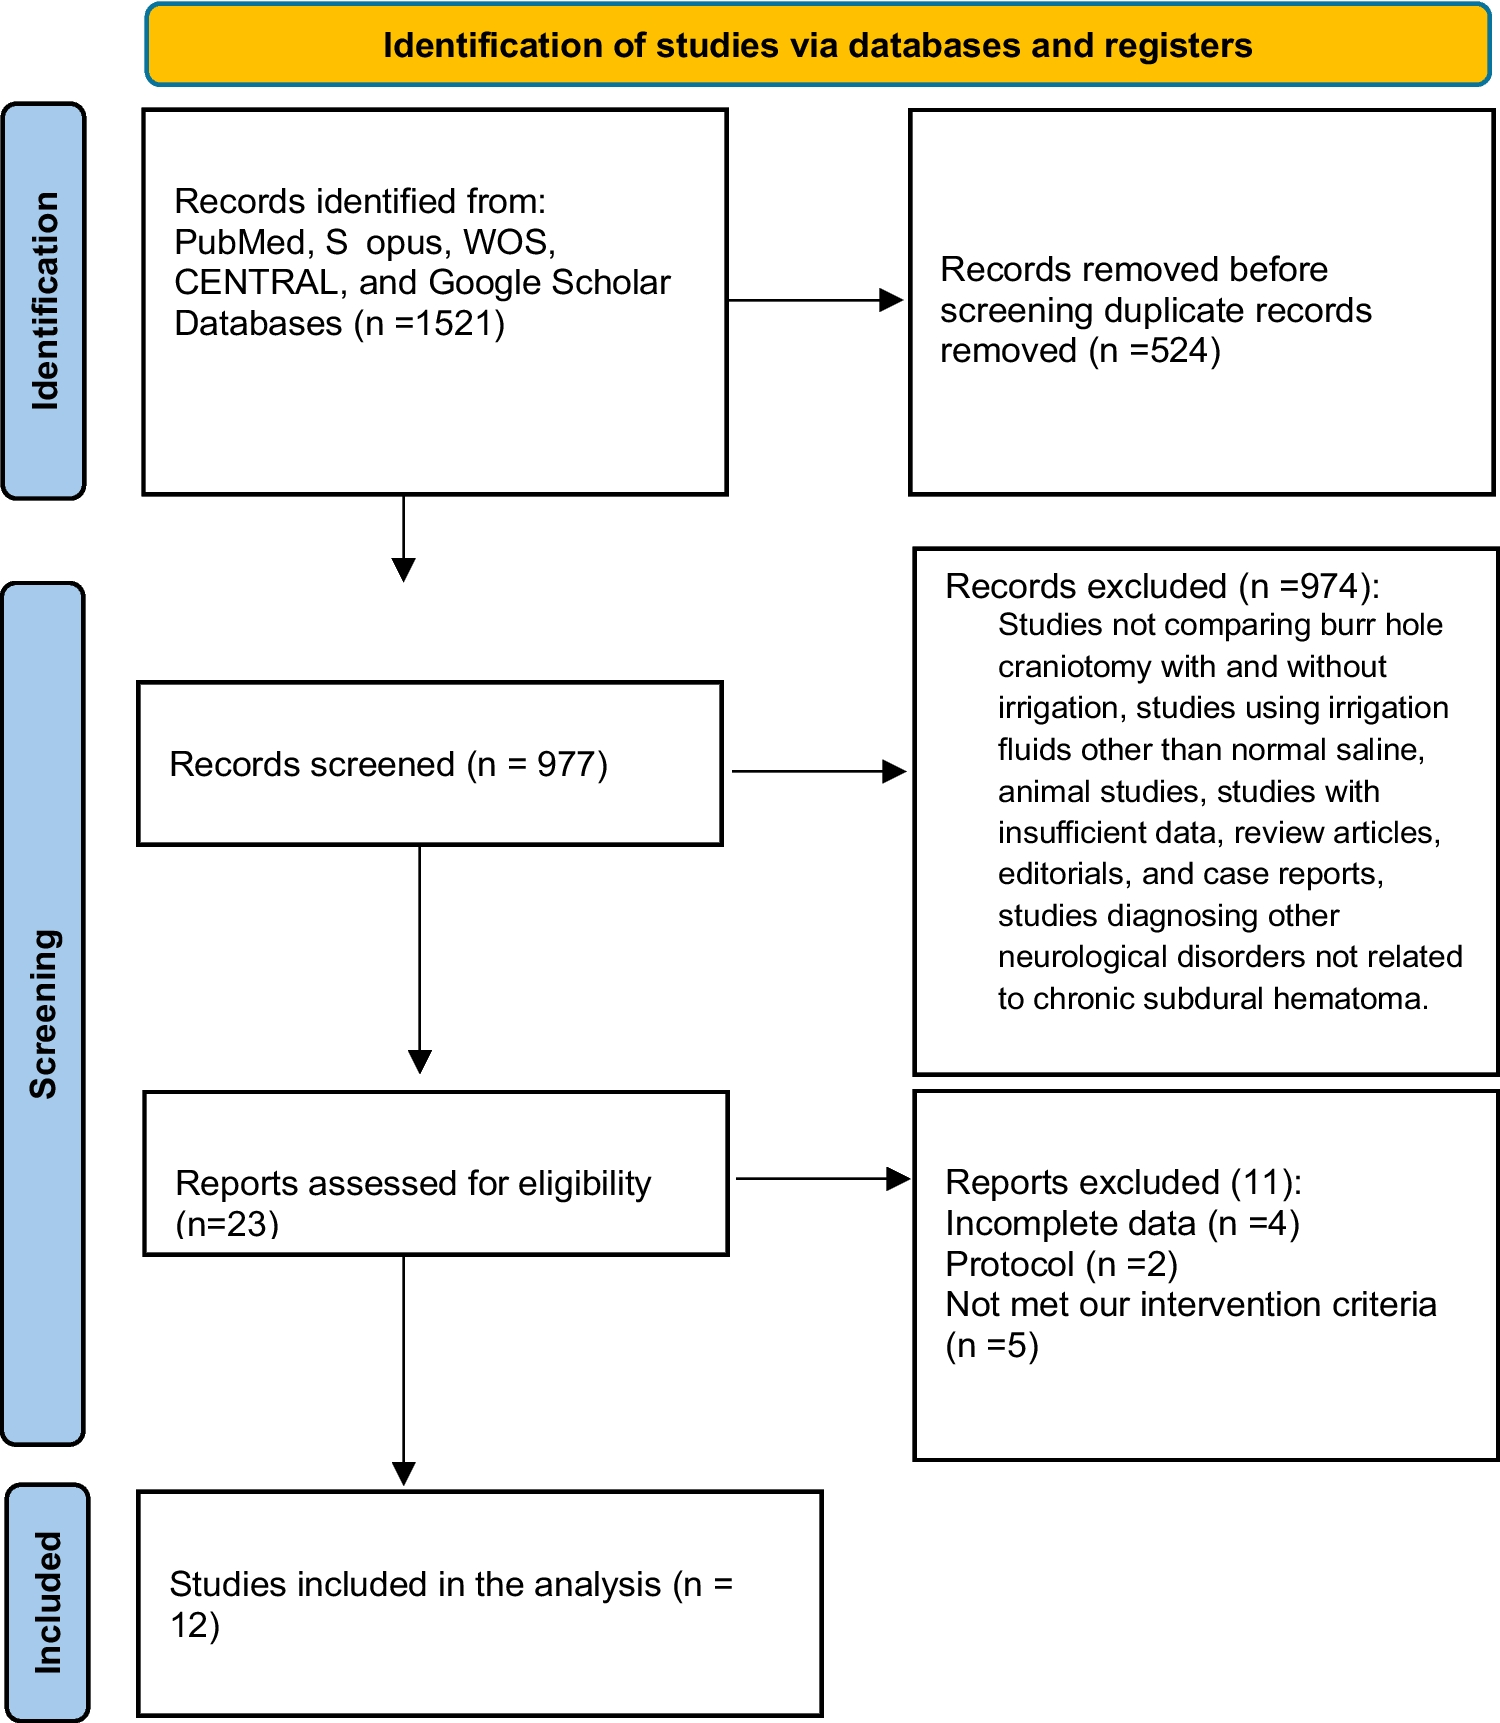 Irrigation versus no irrigation in the treatment of chronic subdural hematoma: An updated systematic review and meta-analysis of 1581 patients